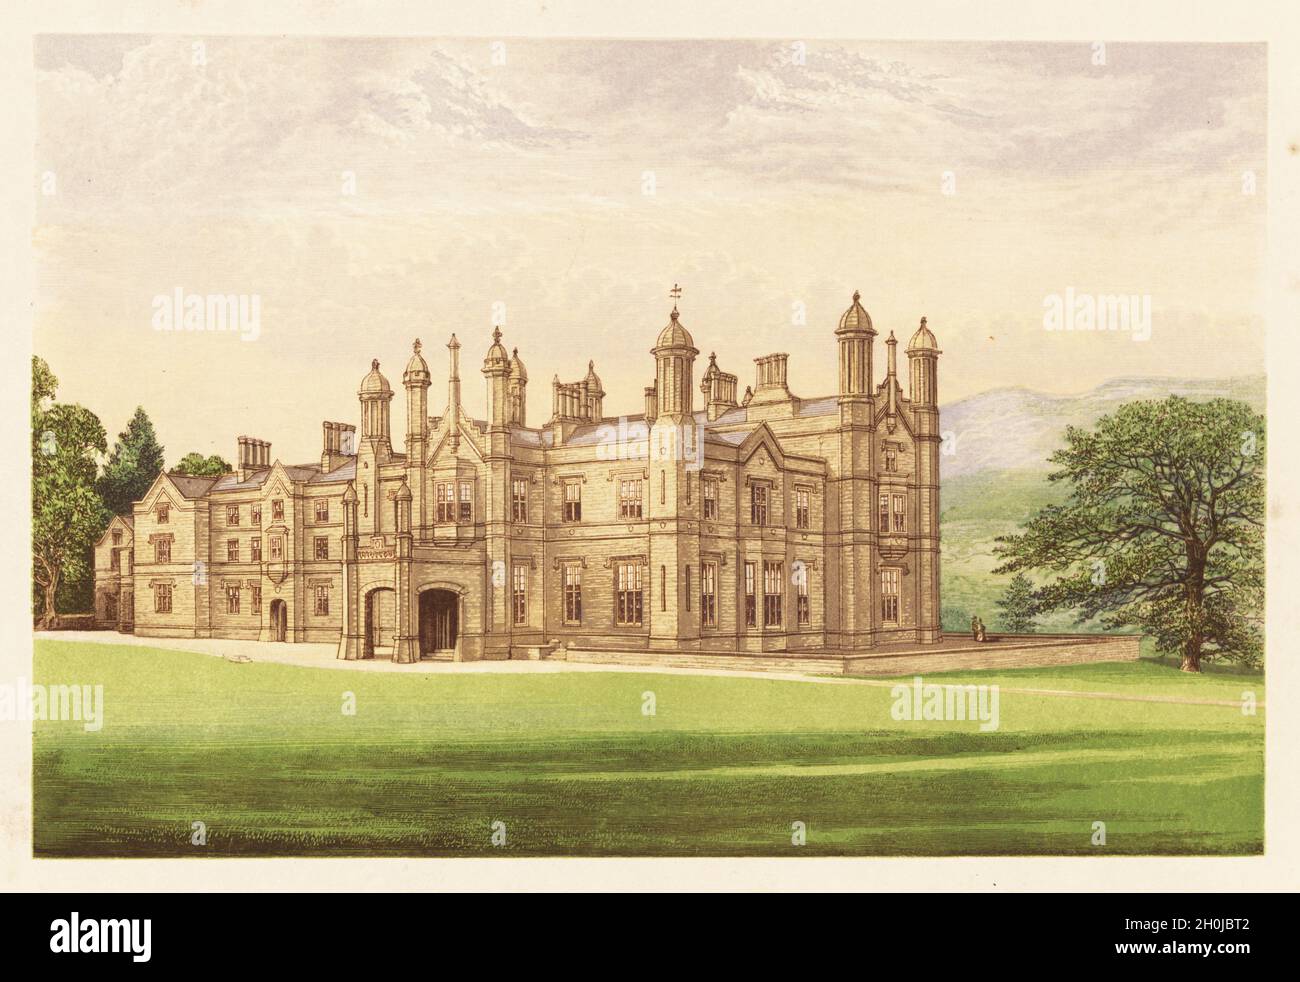 Glanusk Park, Brecknockshire, Wales. Mansion house built for ironmaster Sir Joseph Bailey in 1826. Colour woodblock by Benjamin Fawcett in the Baxter process of an illustration by Alexander Francis Lydon from Reverend Francis Orpen Morris’s Picturesque Views of the Seats of Noblemen and Gentlemen of Great Britain and Ireland, William Mackenzie, London, 1880. Stock Photo